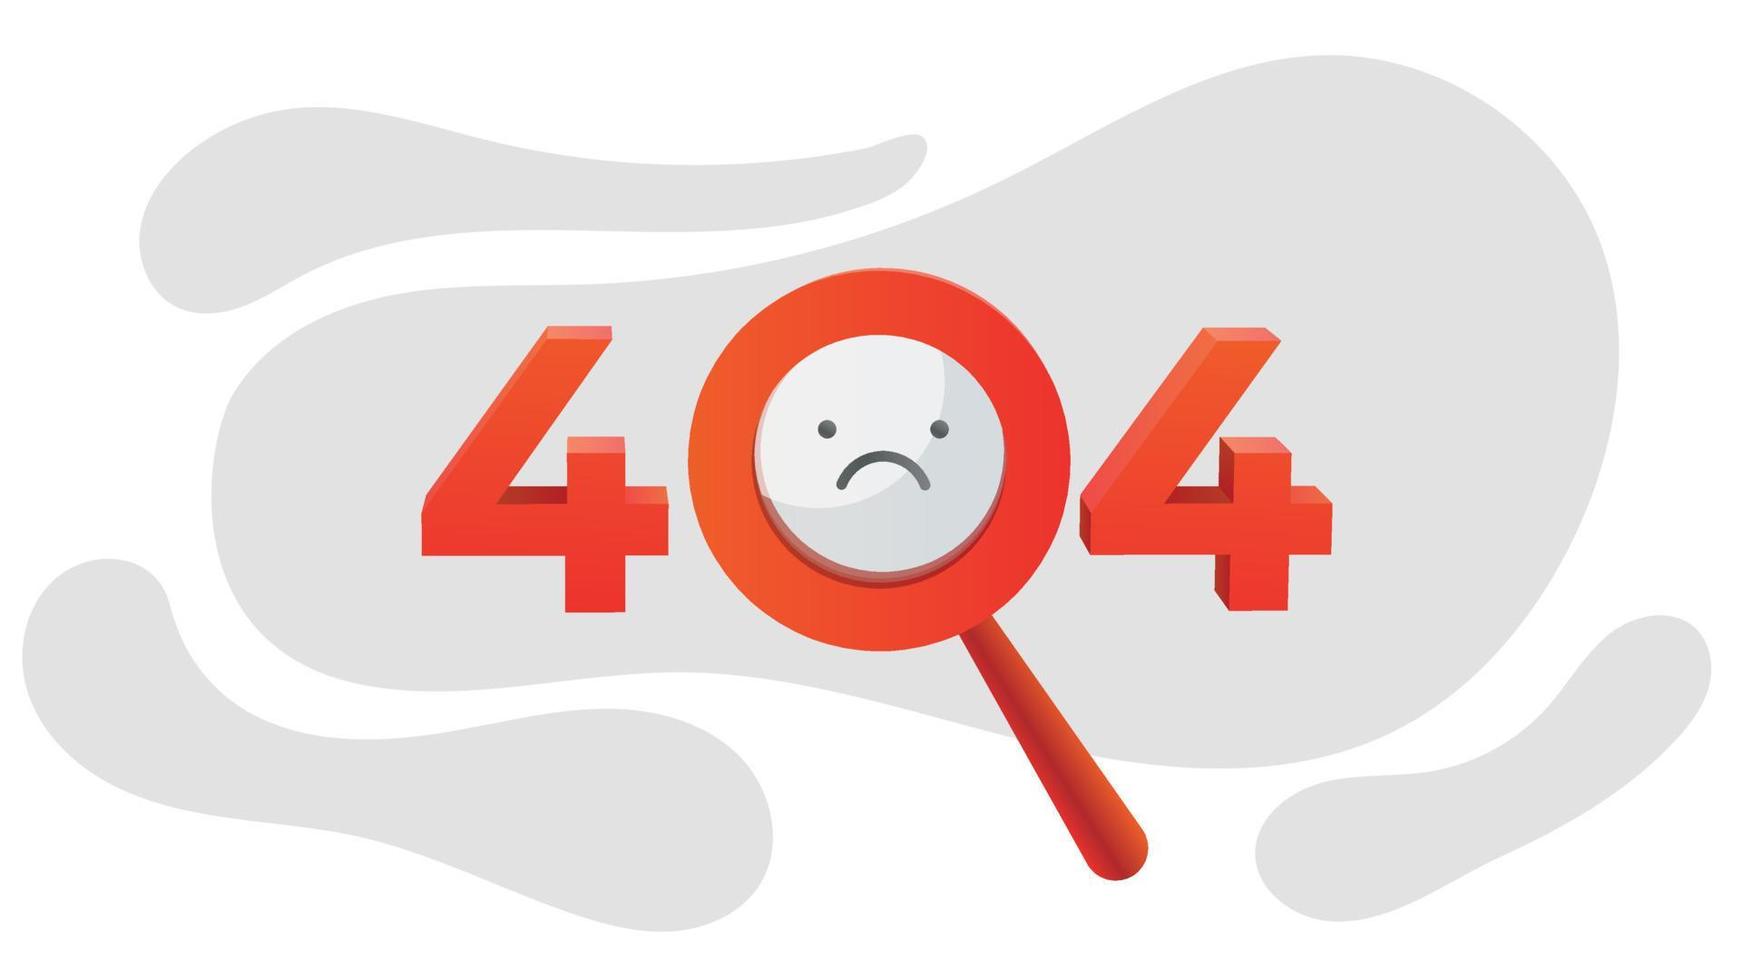 Error 404 page not found concept illustration. Web page error creative design. Modern graphic element for landing page, infographic, icon vector